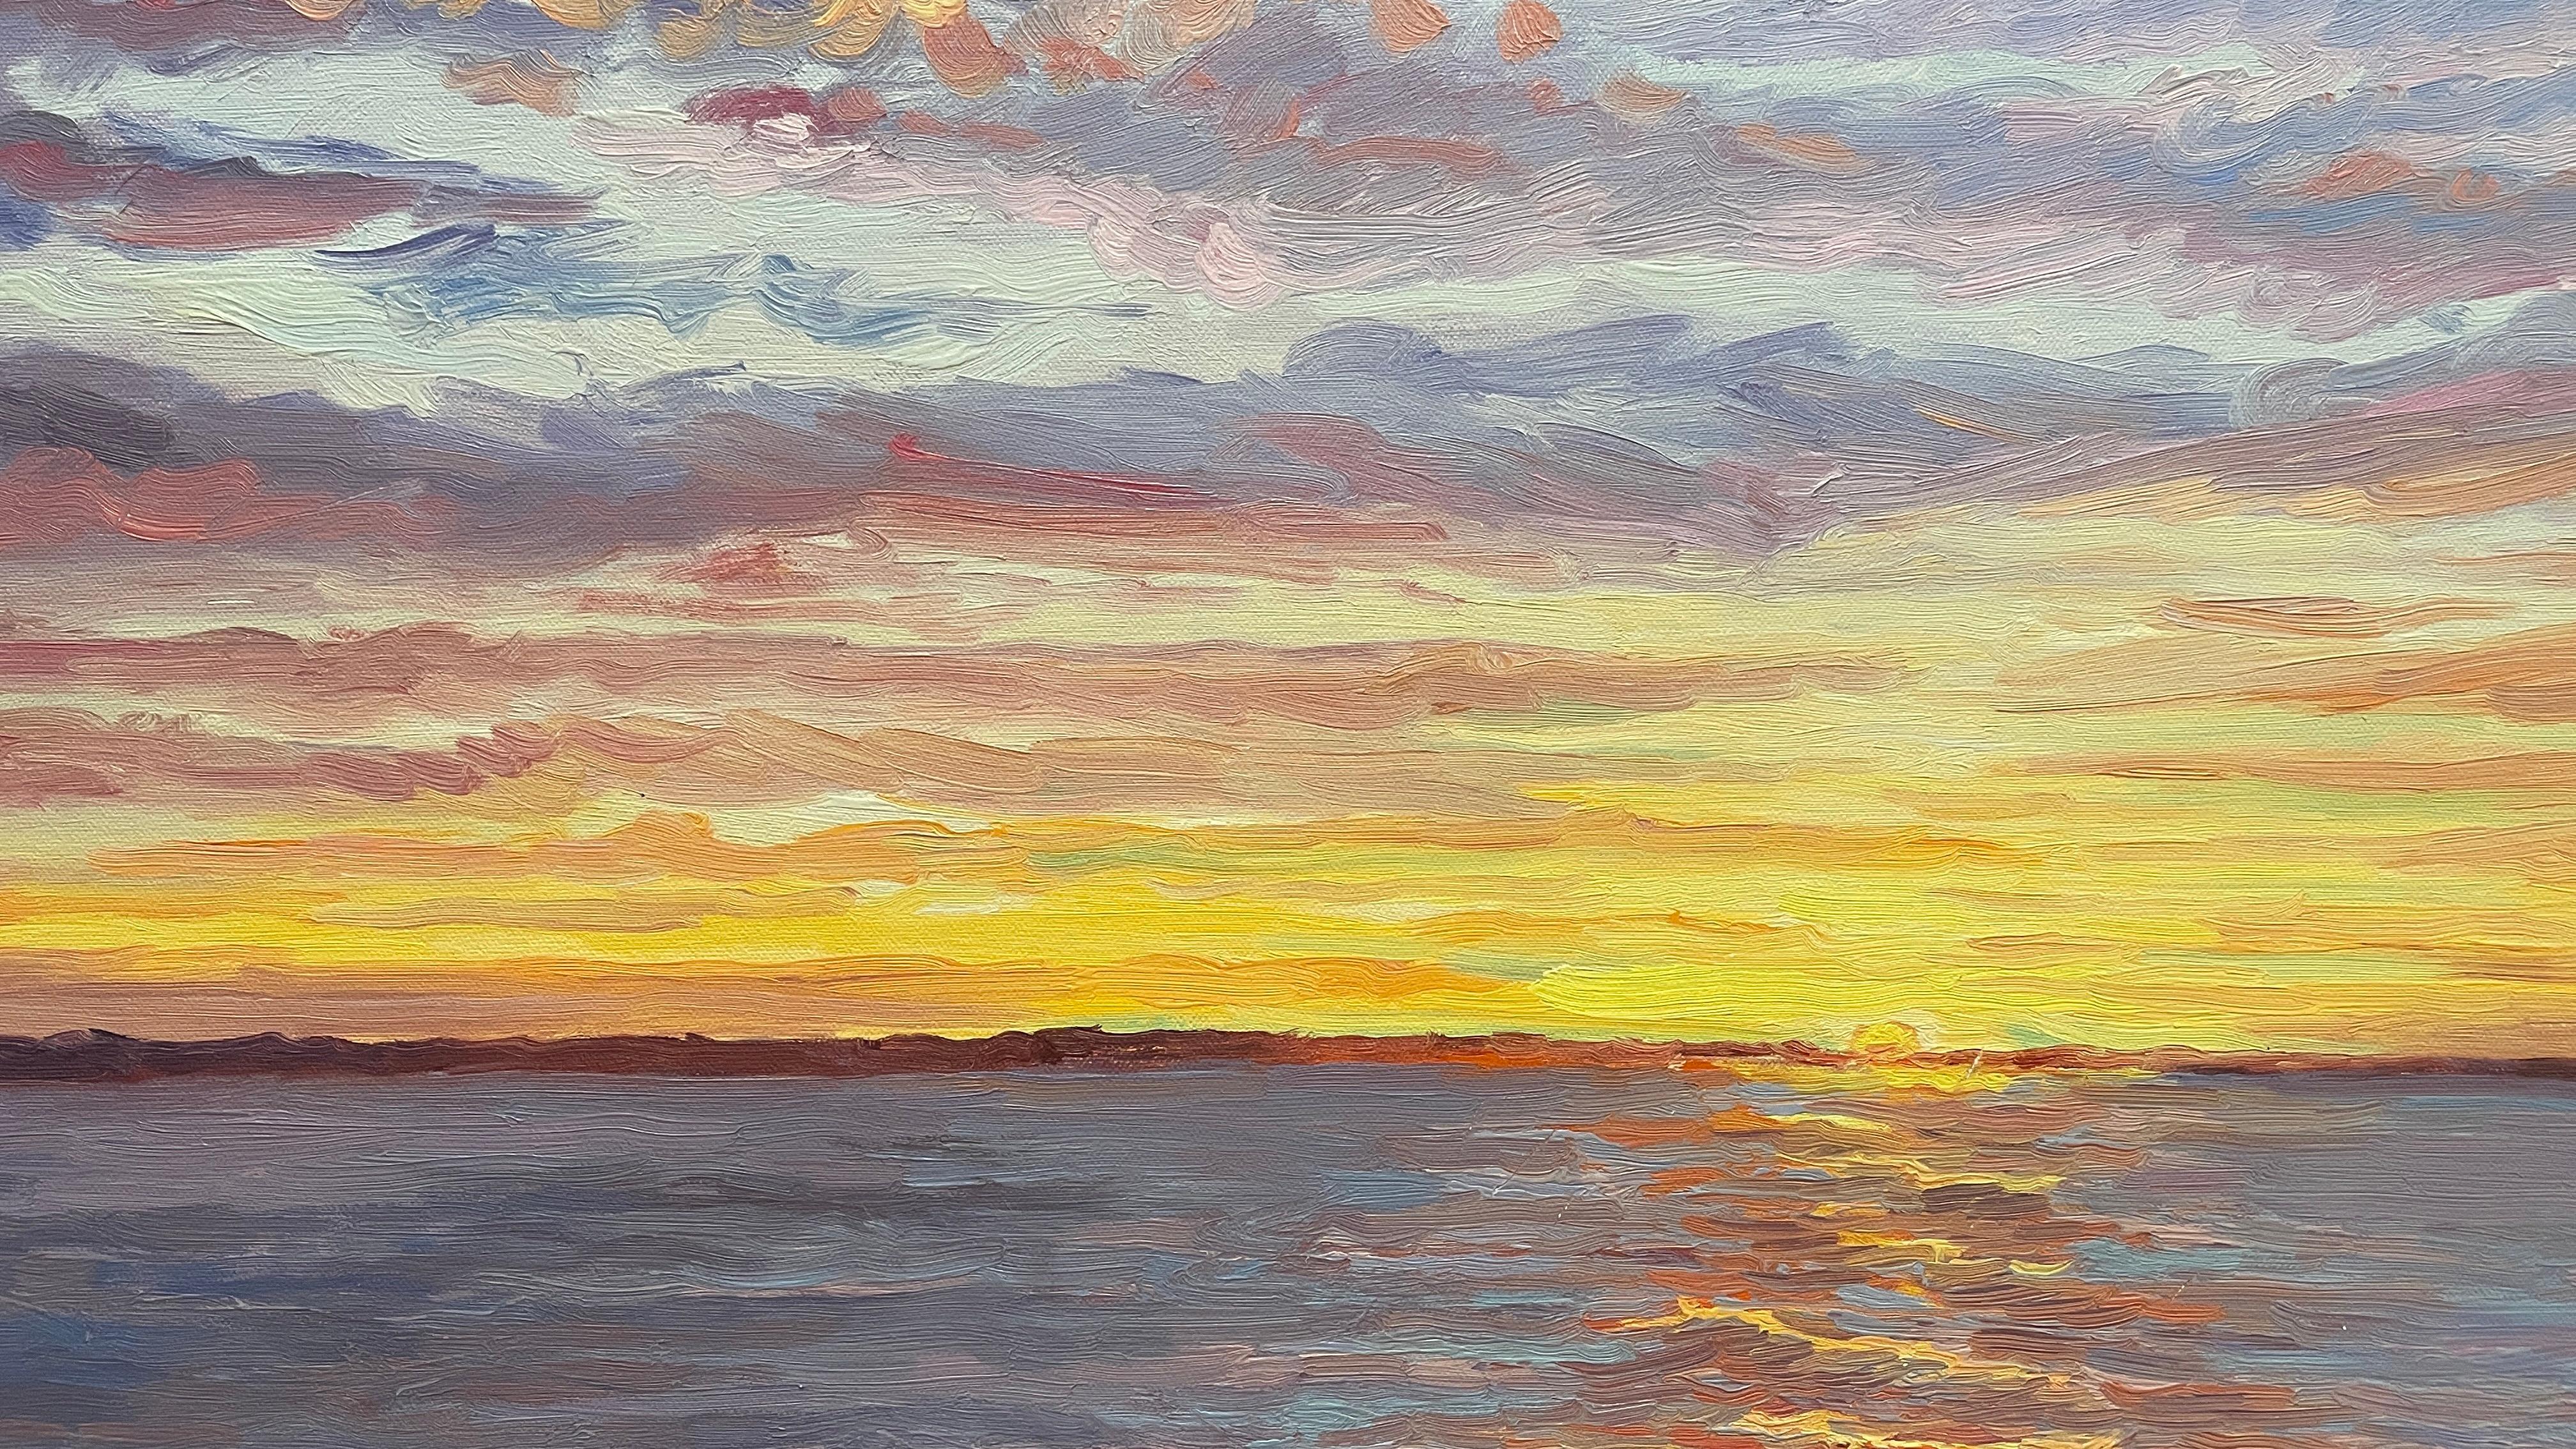 Nature's Glory at End of Day. Title - Sunset over Gardiners Bay - American Realist Painting by Carl Scorza